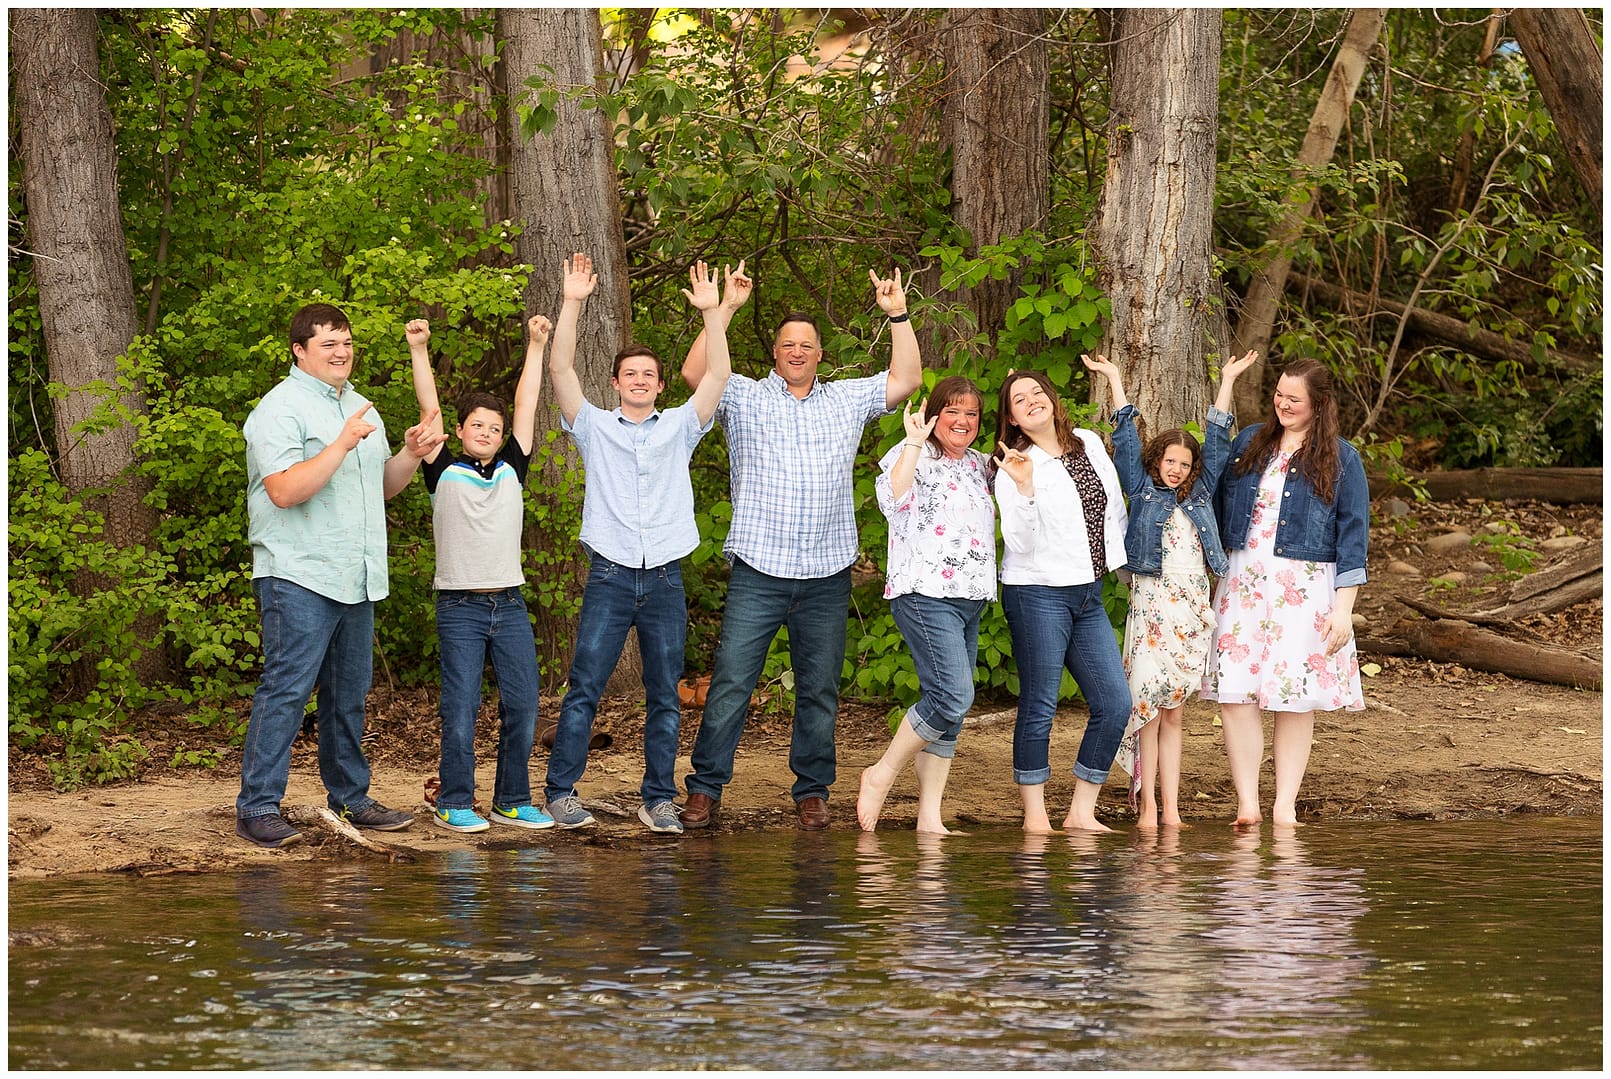 All smiles for a successful family photo session! Photo by Tiffany Hix Photography.